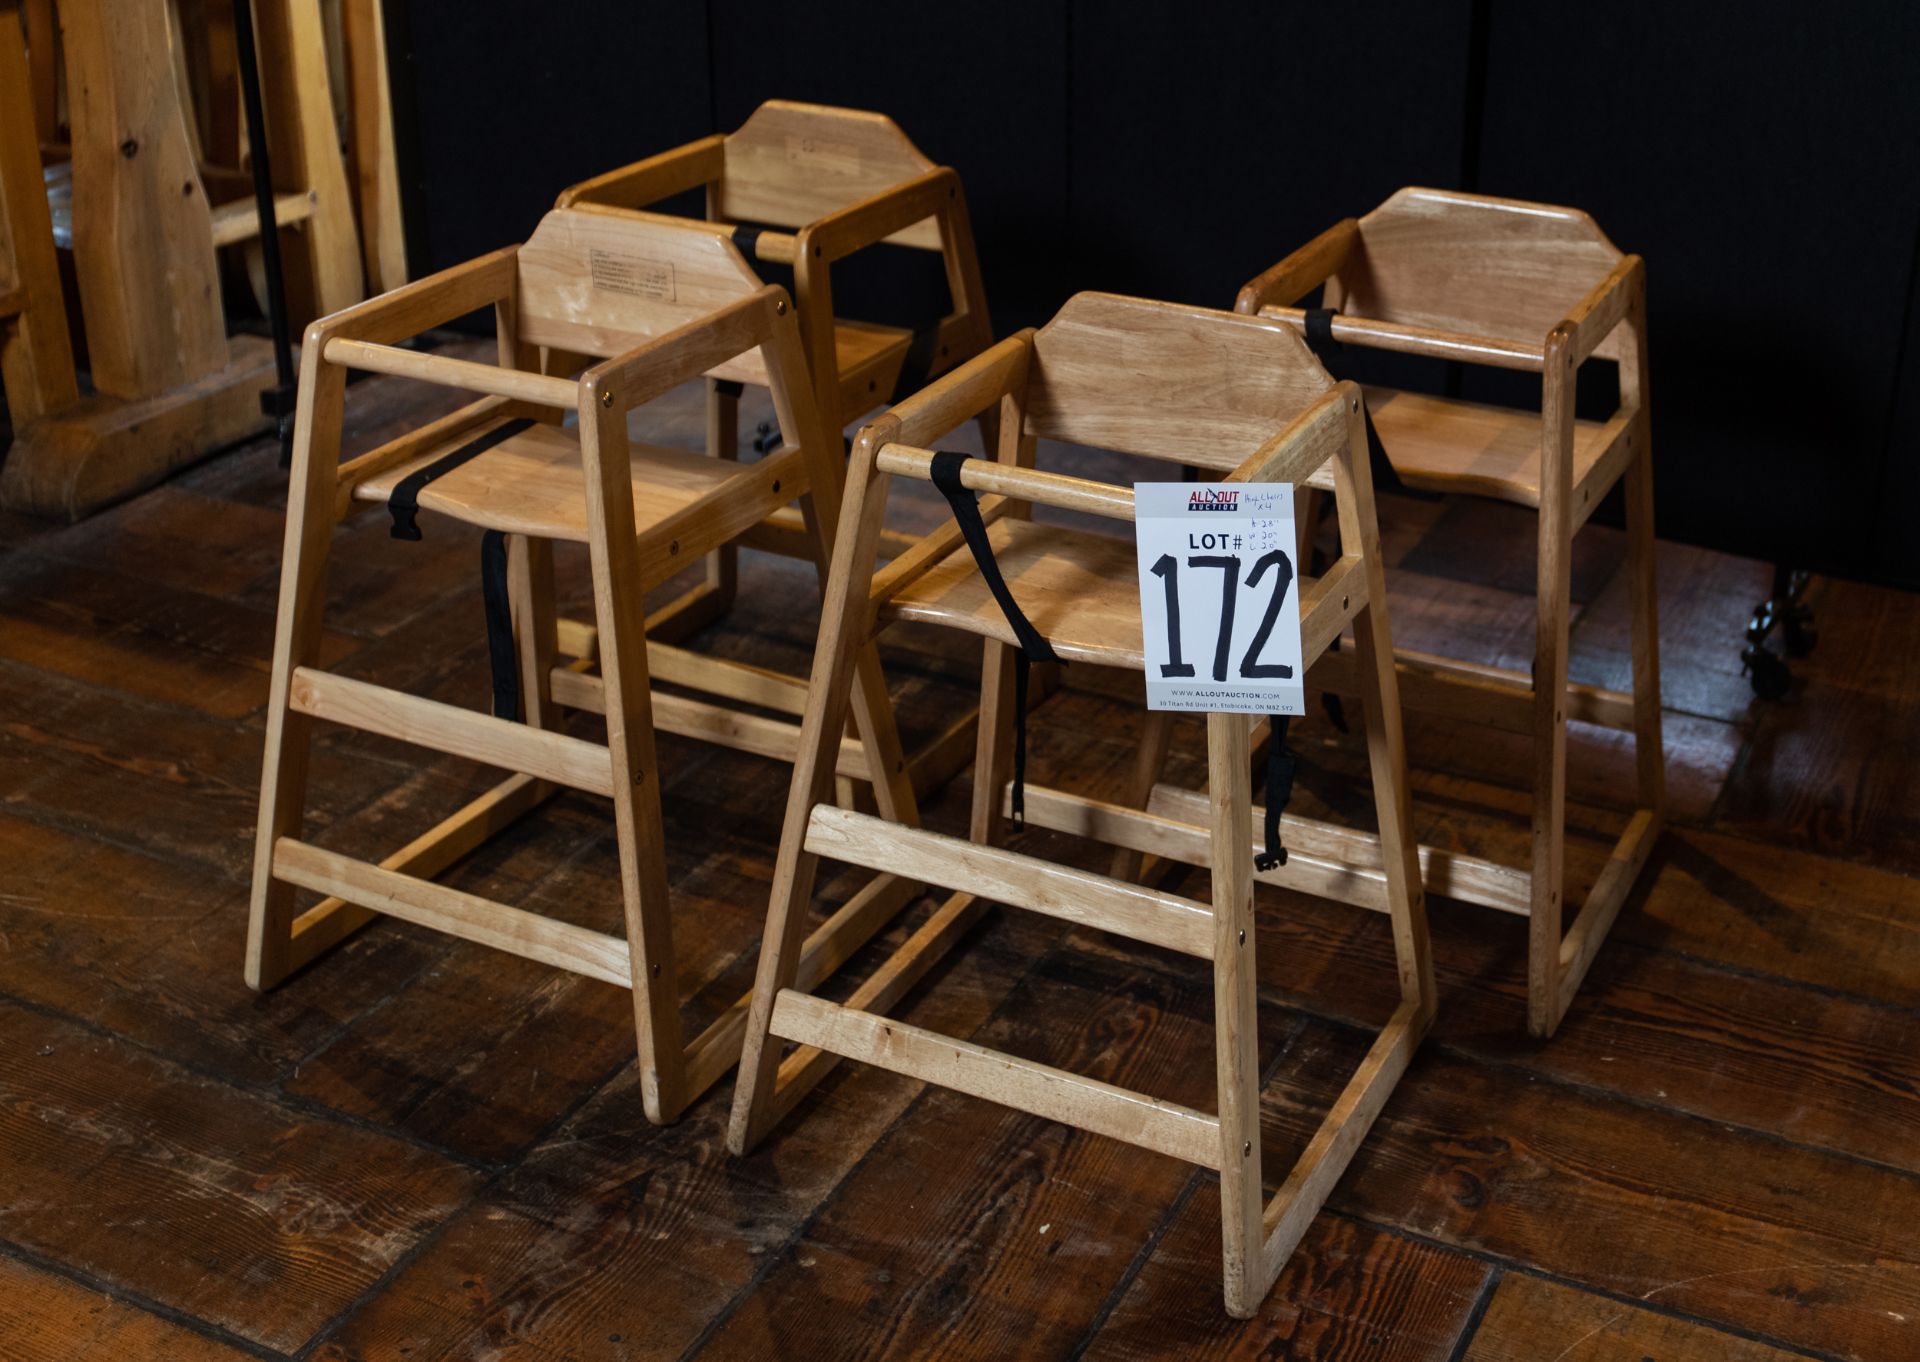 FOUR HIGH CHAIRS H-28" W-20" D-20"